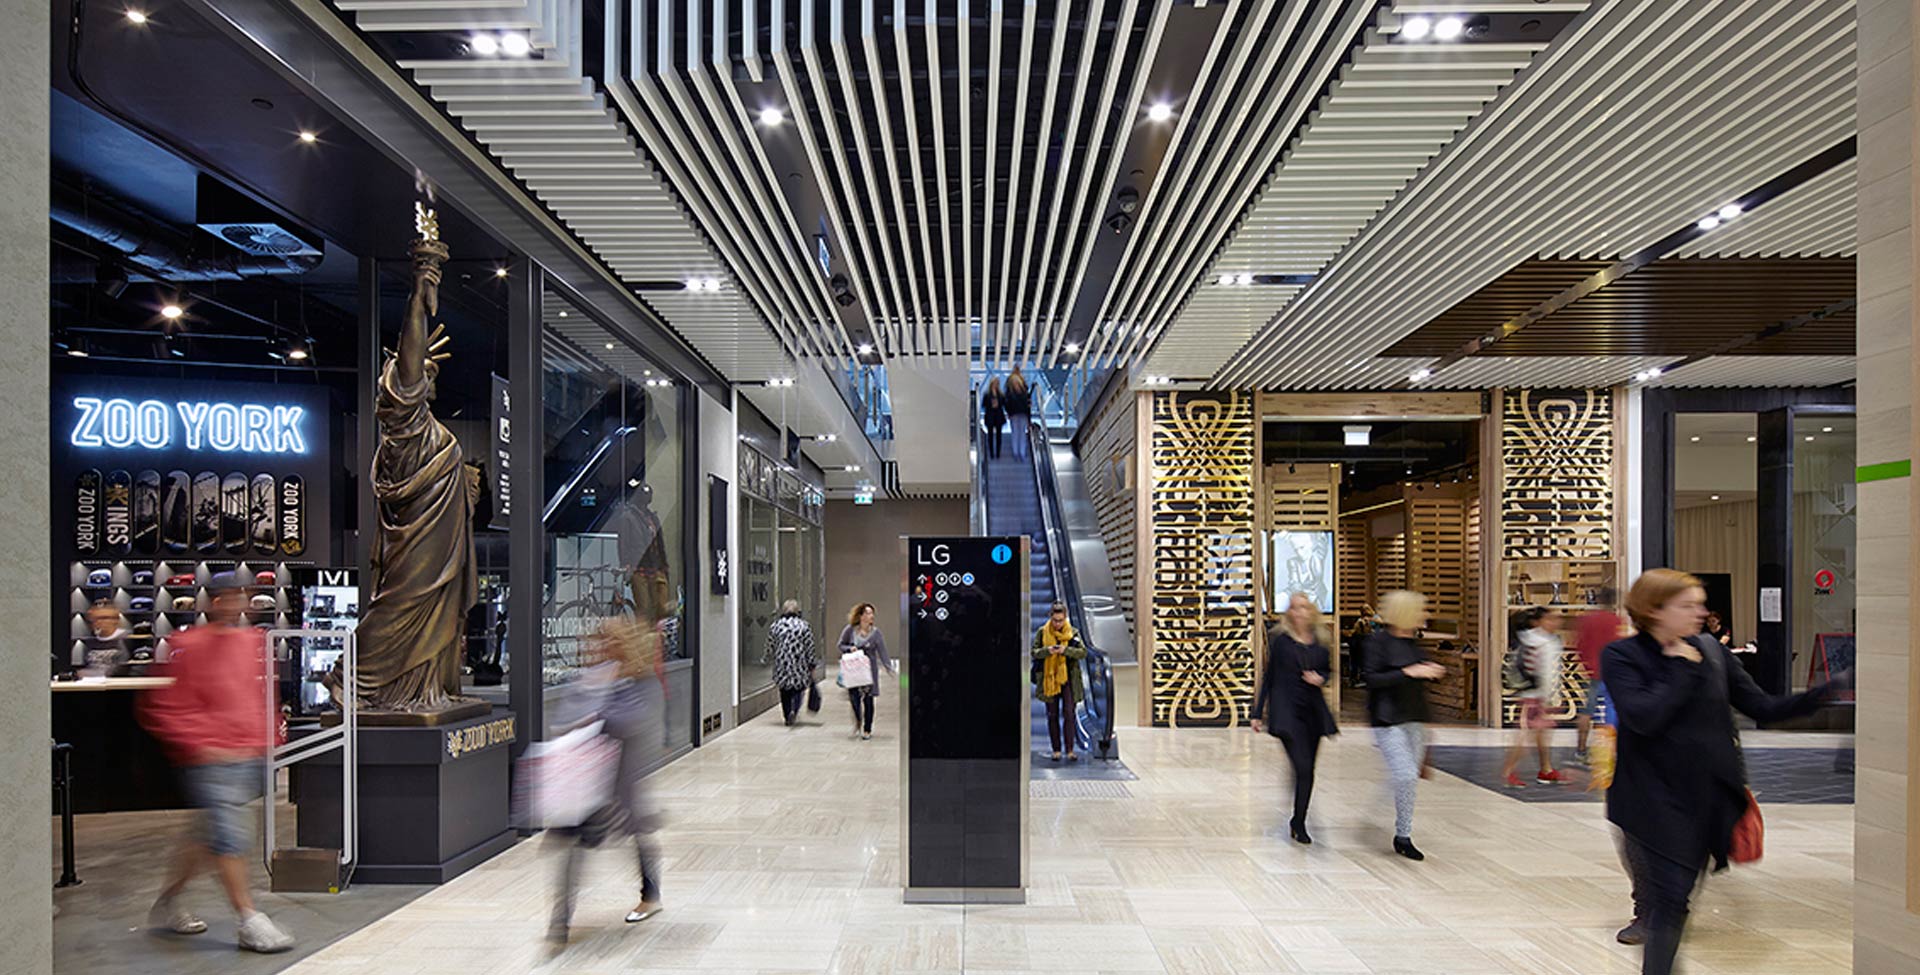 Emporium Mall Melbourne - successful design and branding concepts navigation and circulation